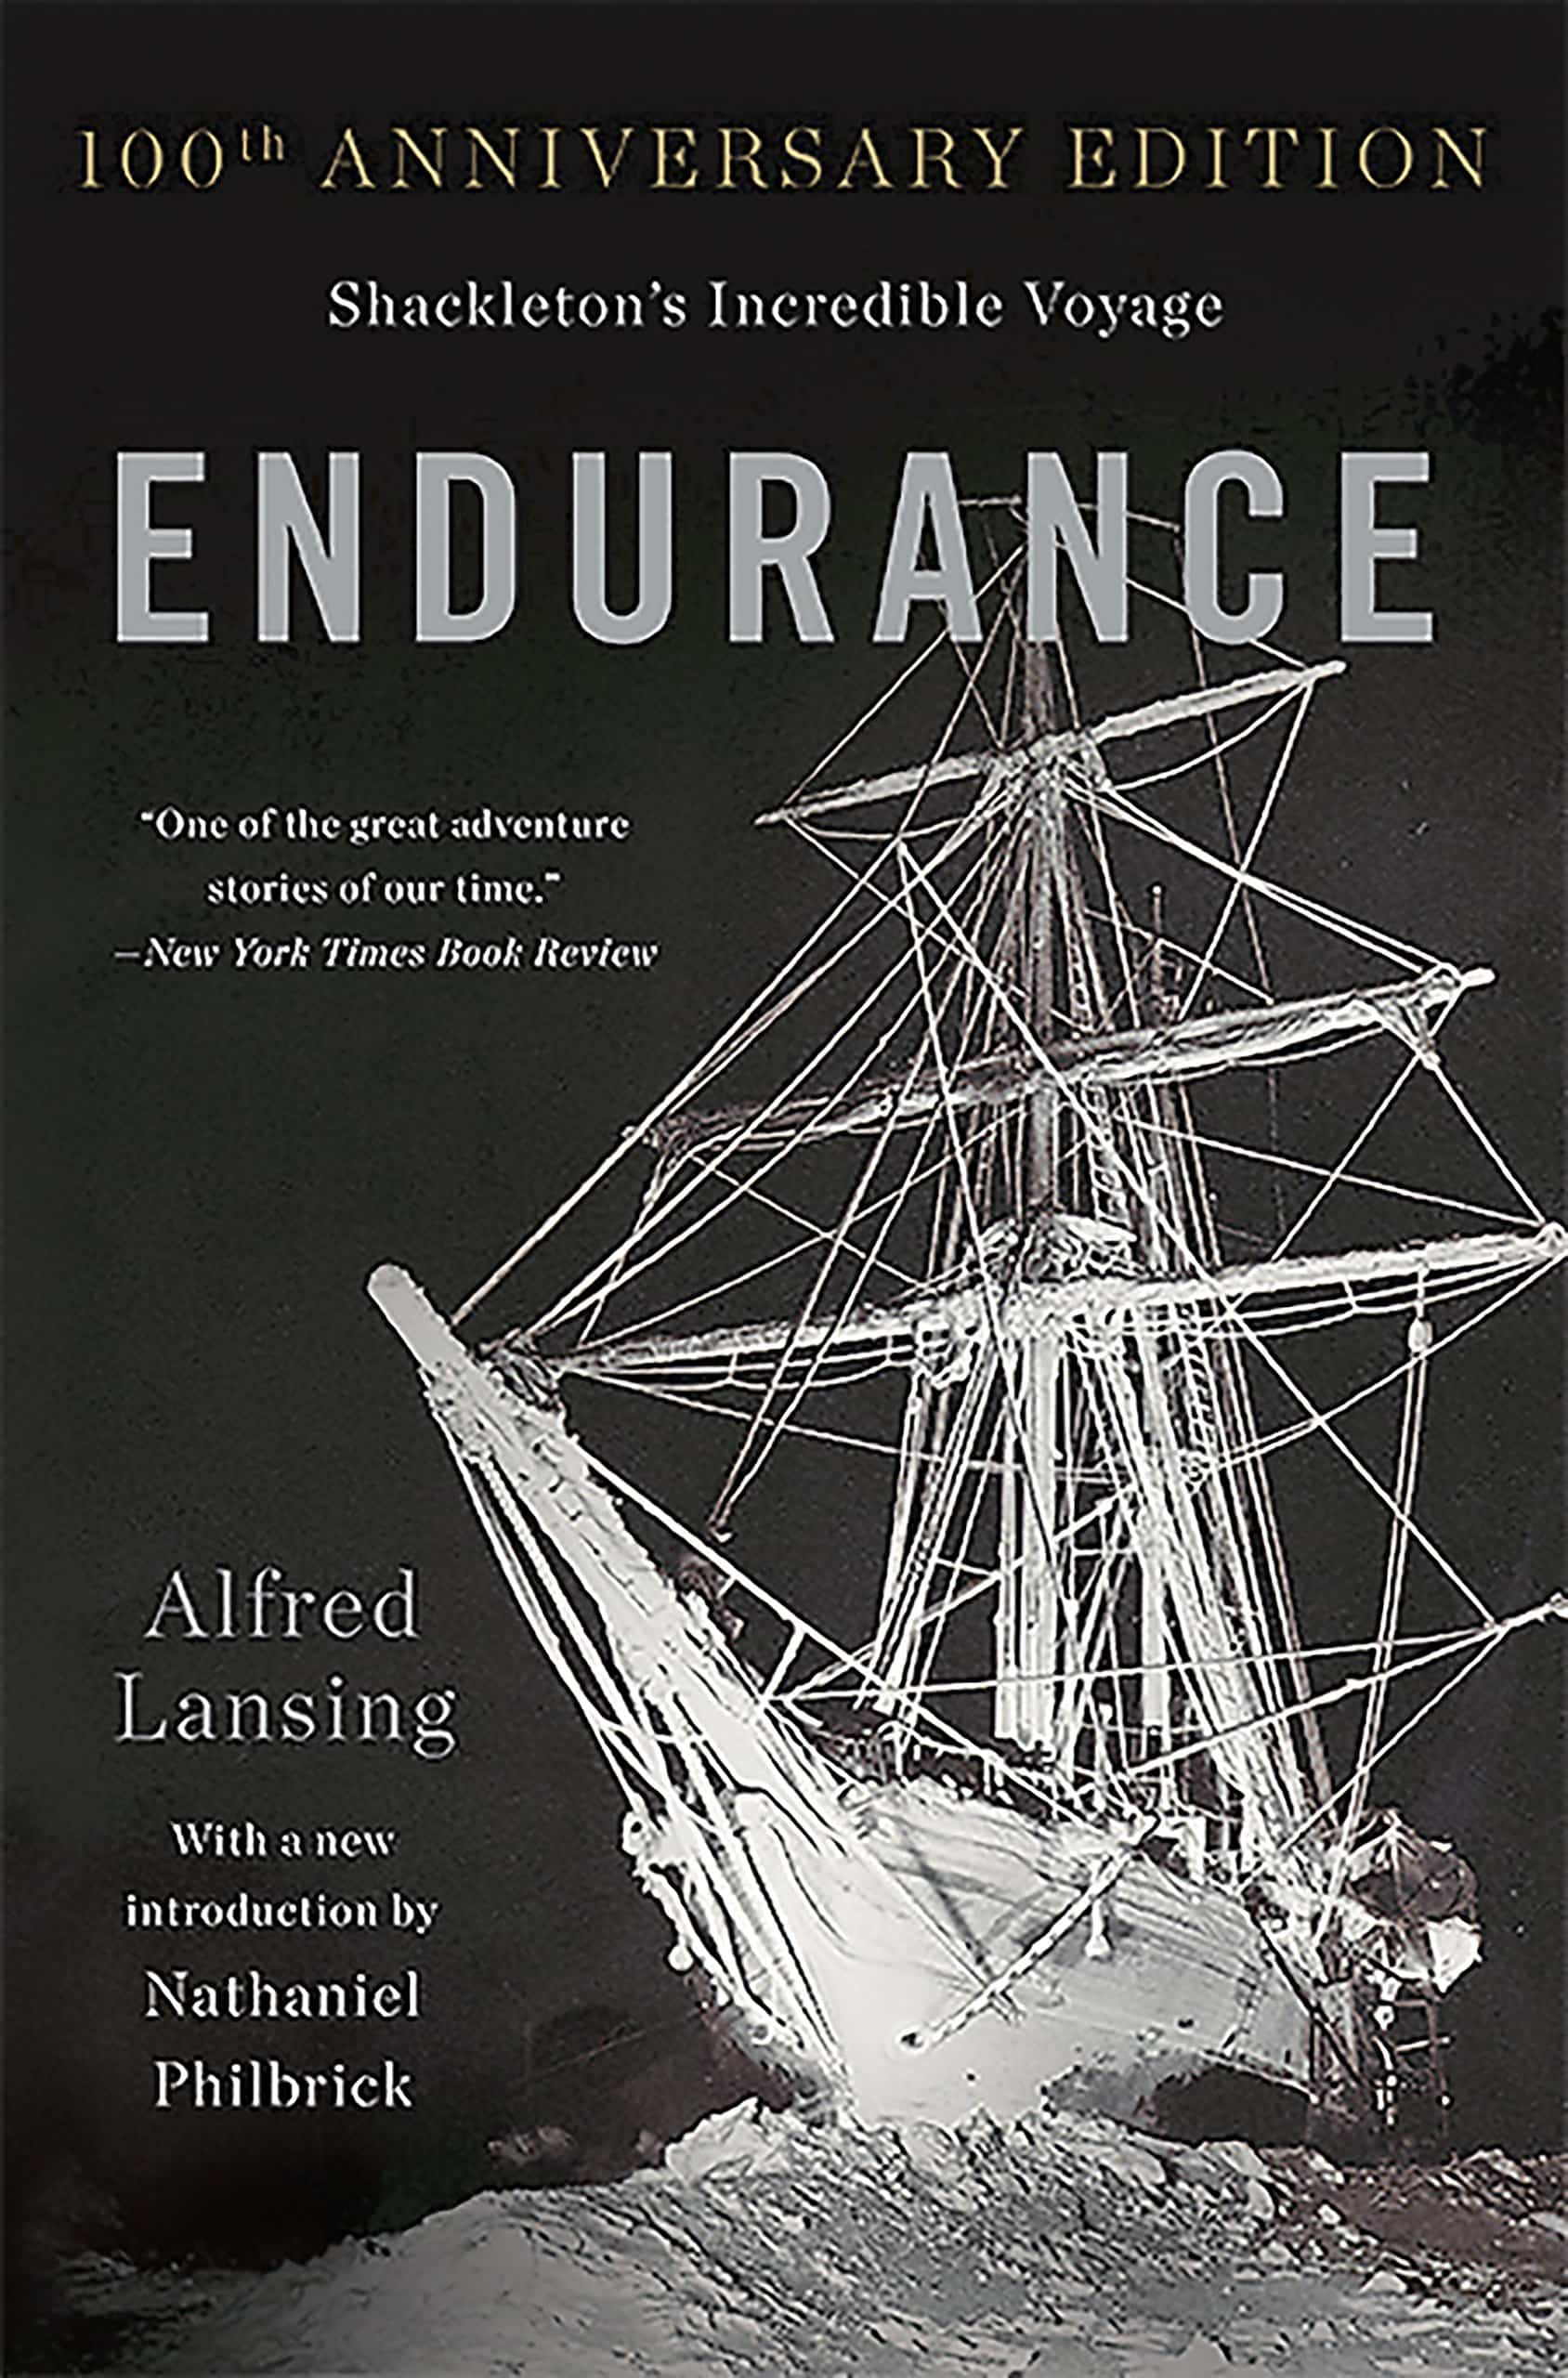 The cover of Endurance